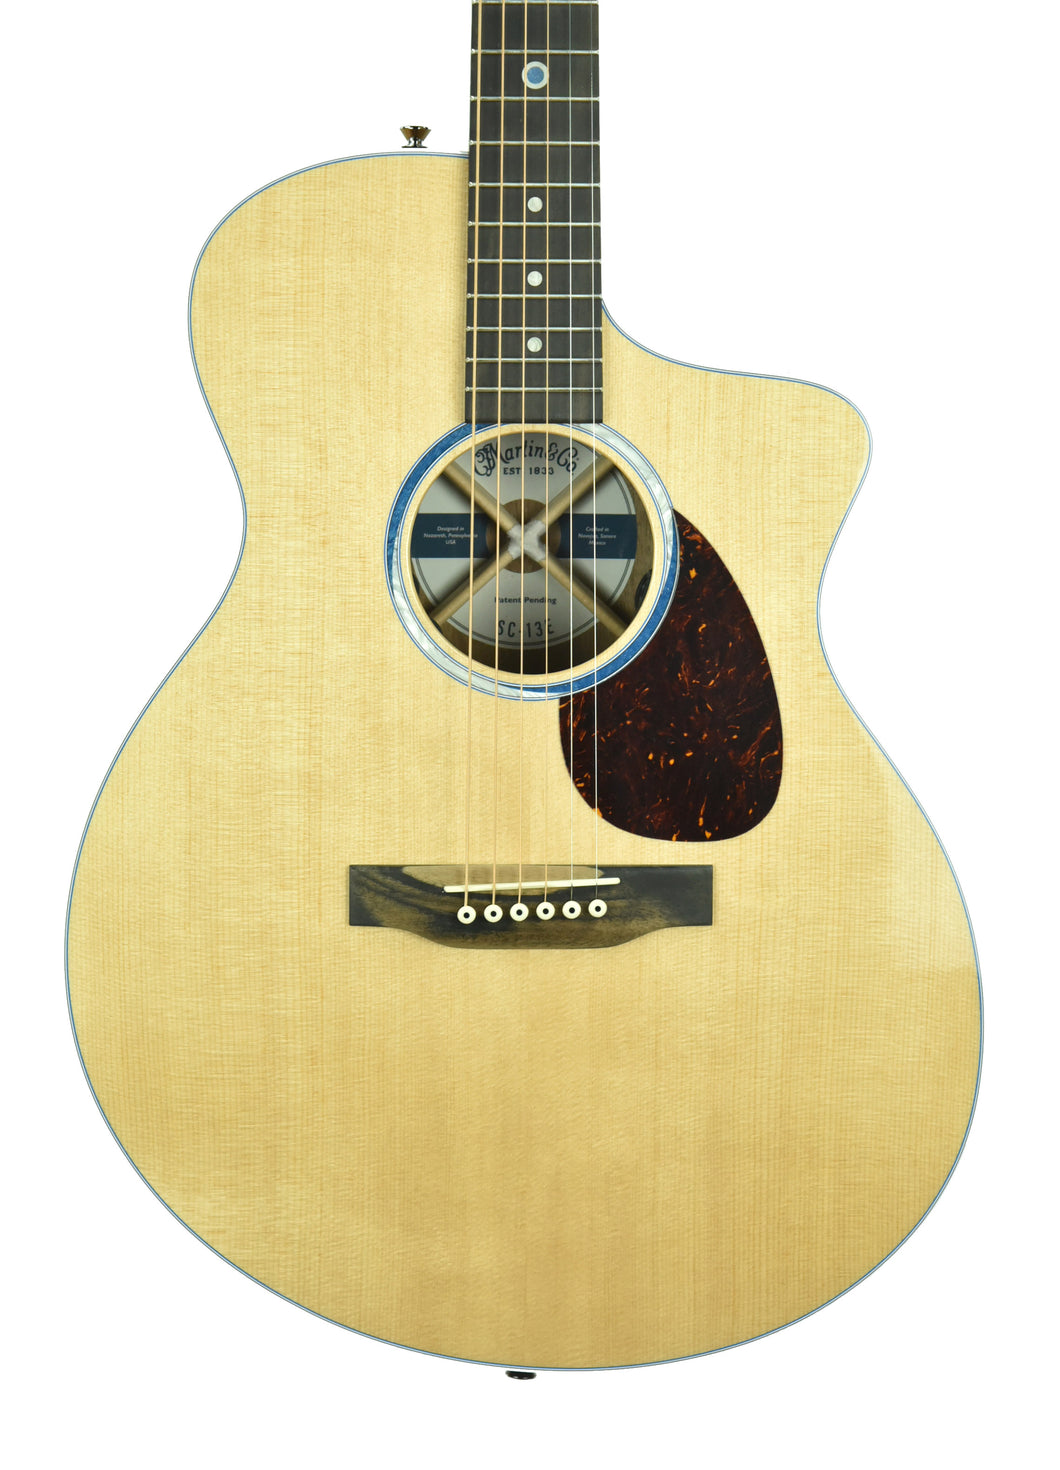 Martin SC-13E Acoustic Electric Guitar in Natural 2390997 - The Music Gallery